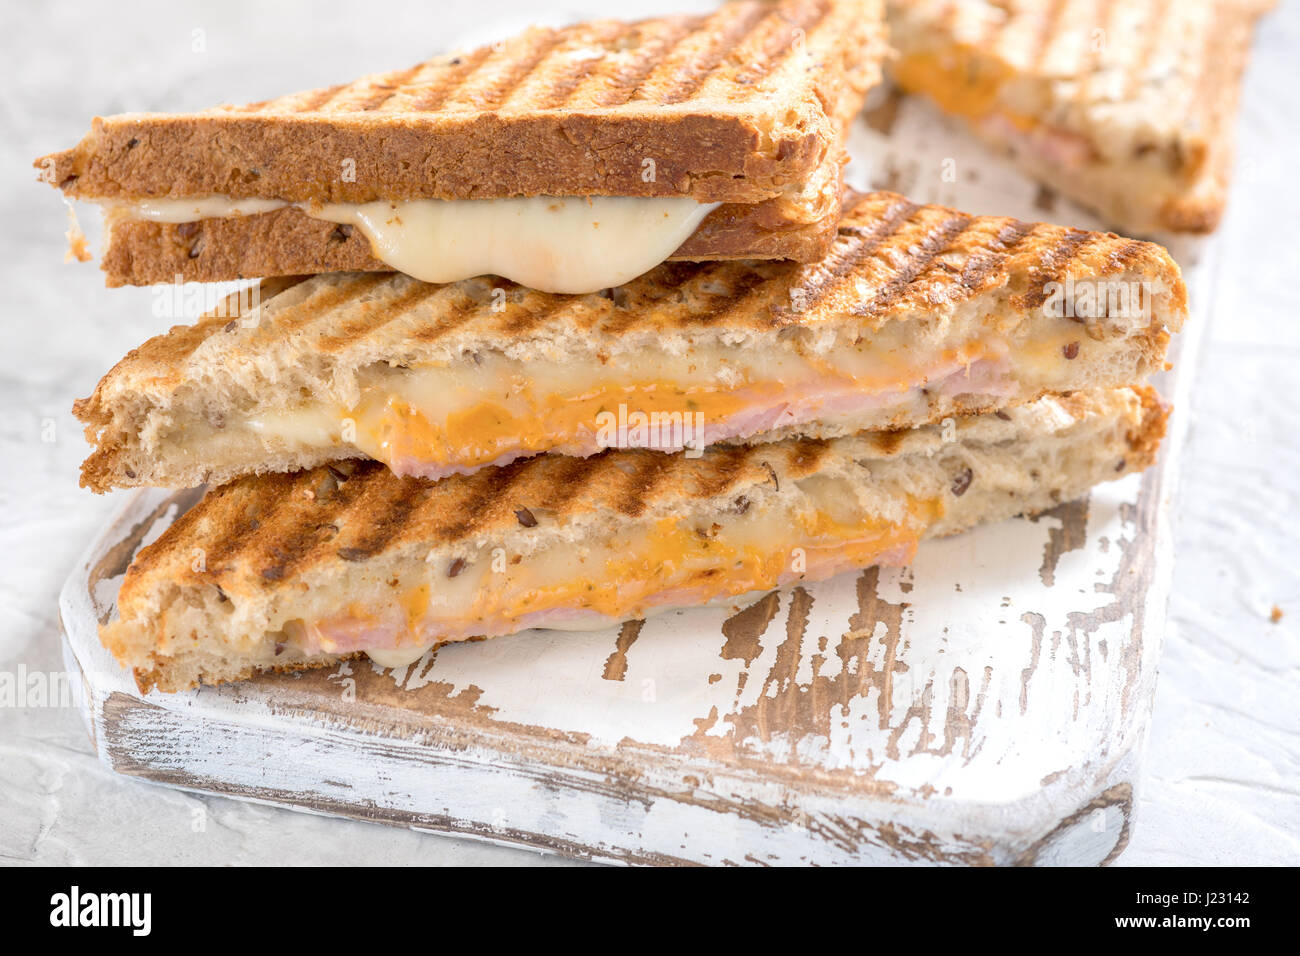 Grilled cheese sandwich with ham Stock Photo